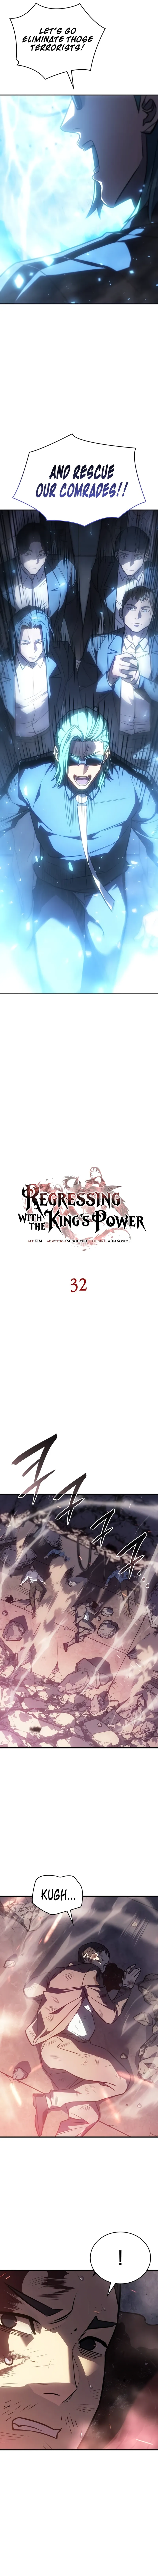 Regressing with the King’s Power chapter 32